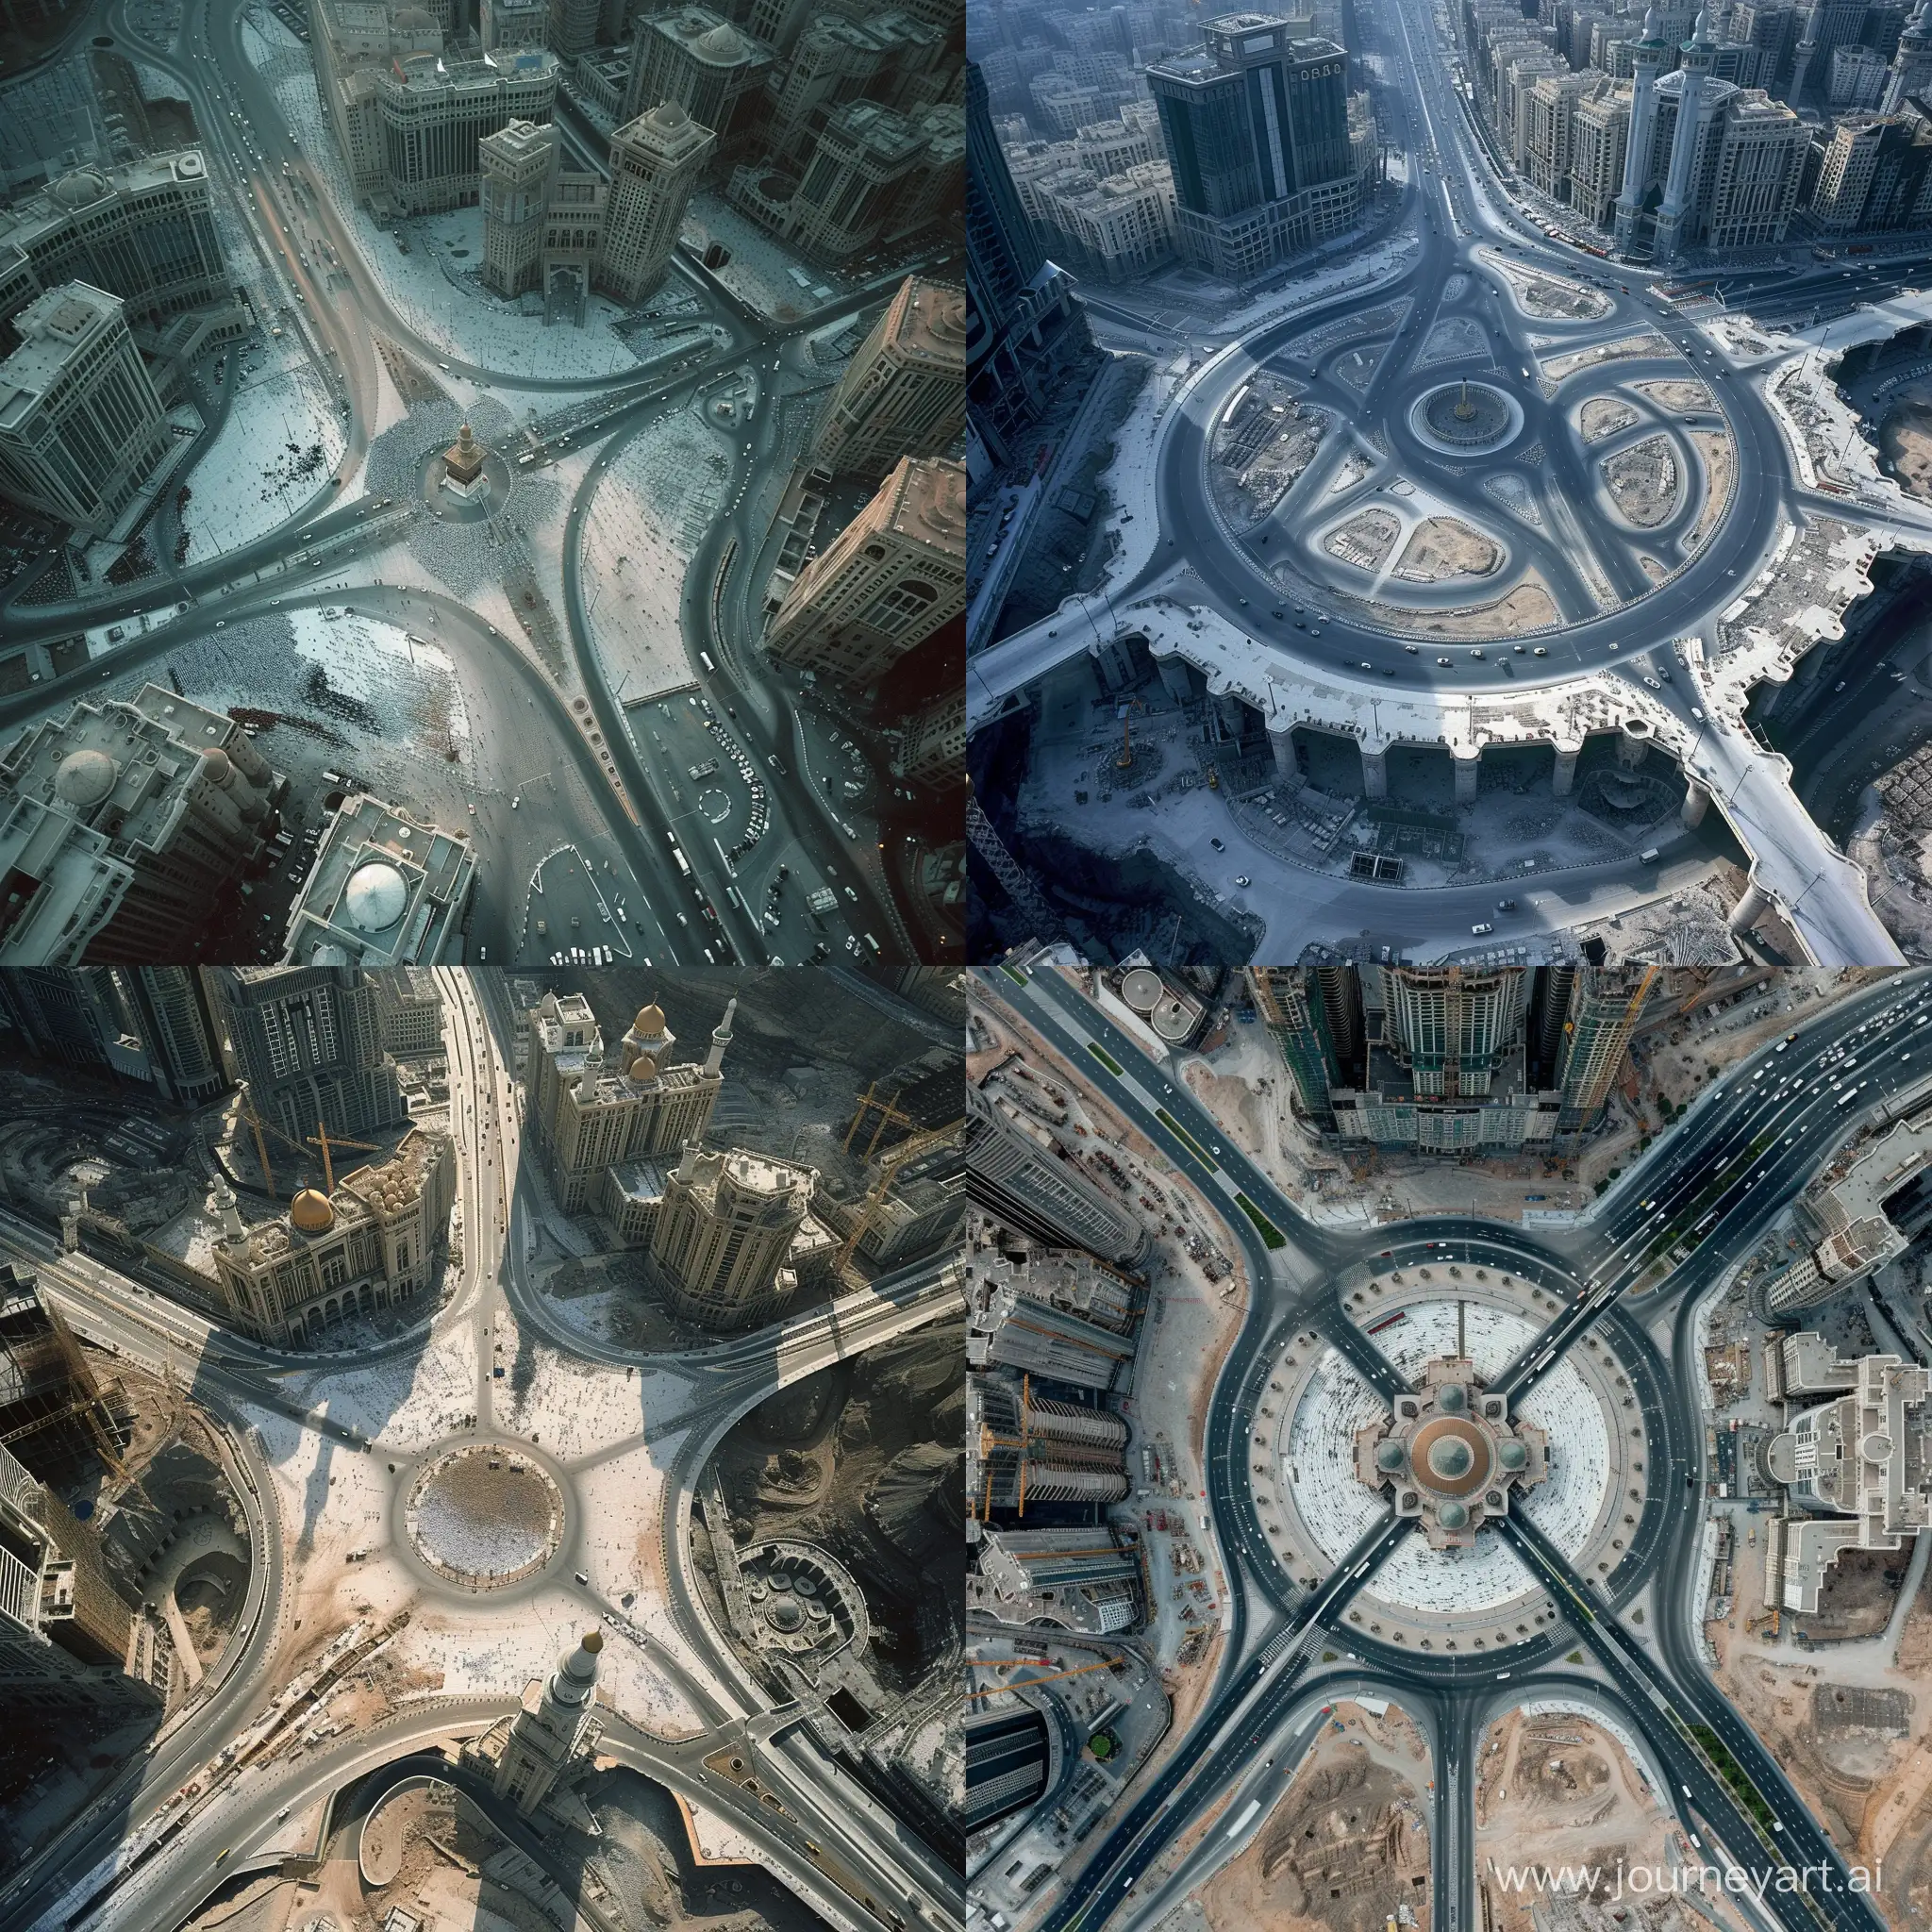 Mecca-Mosque-Architectures-Surrounding-Road-Intersection